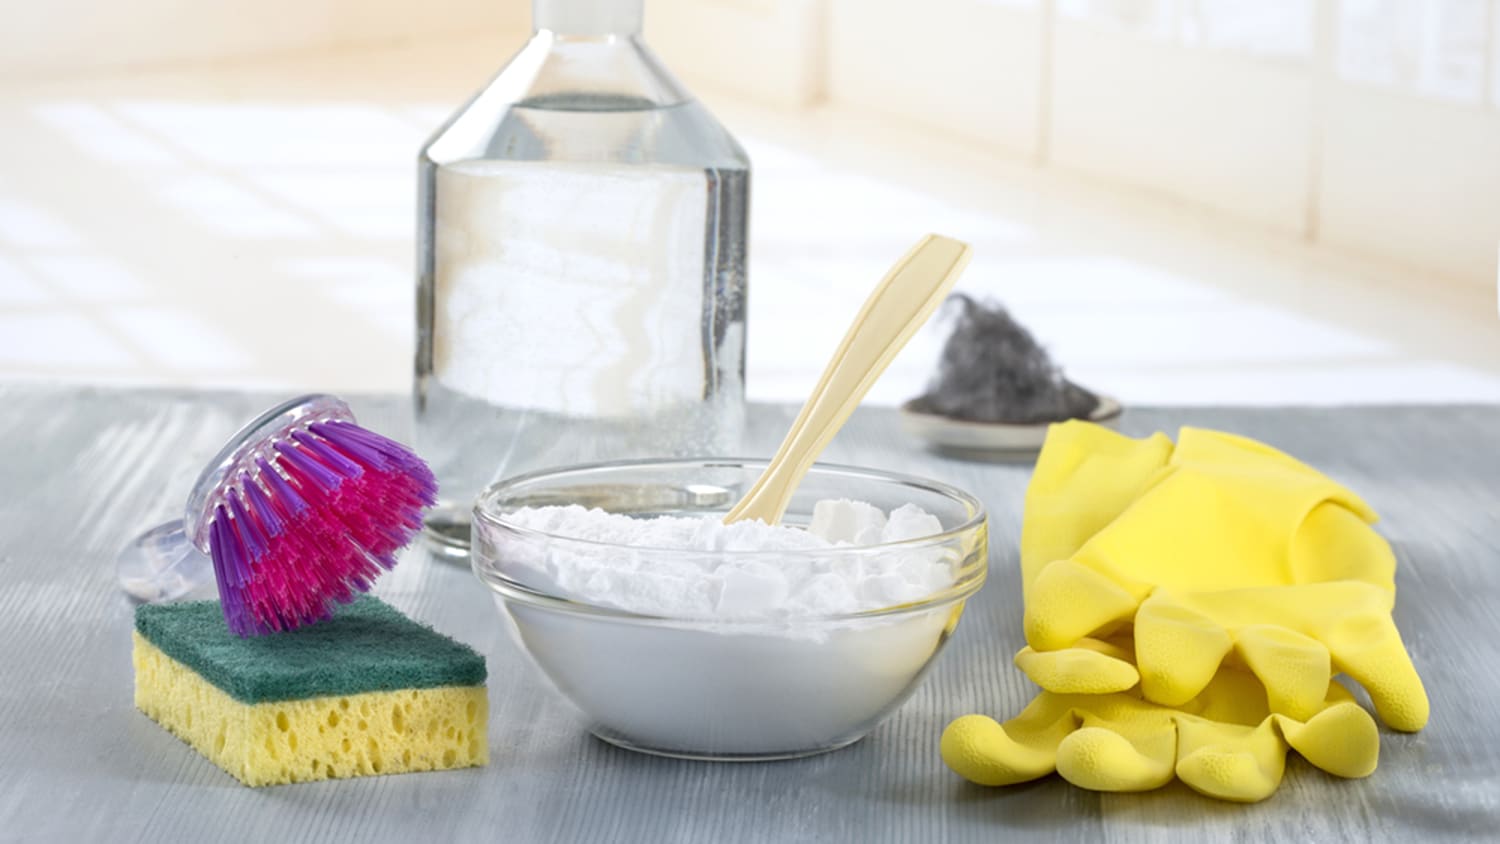 8 Baking Soda Uses for Cooking and Cleaning